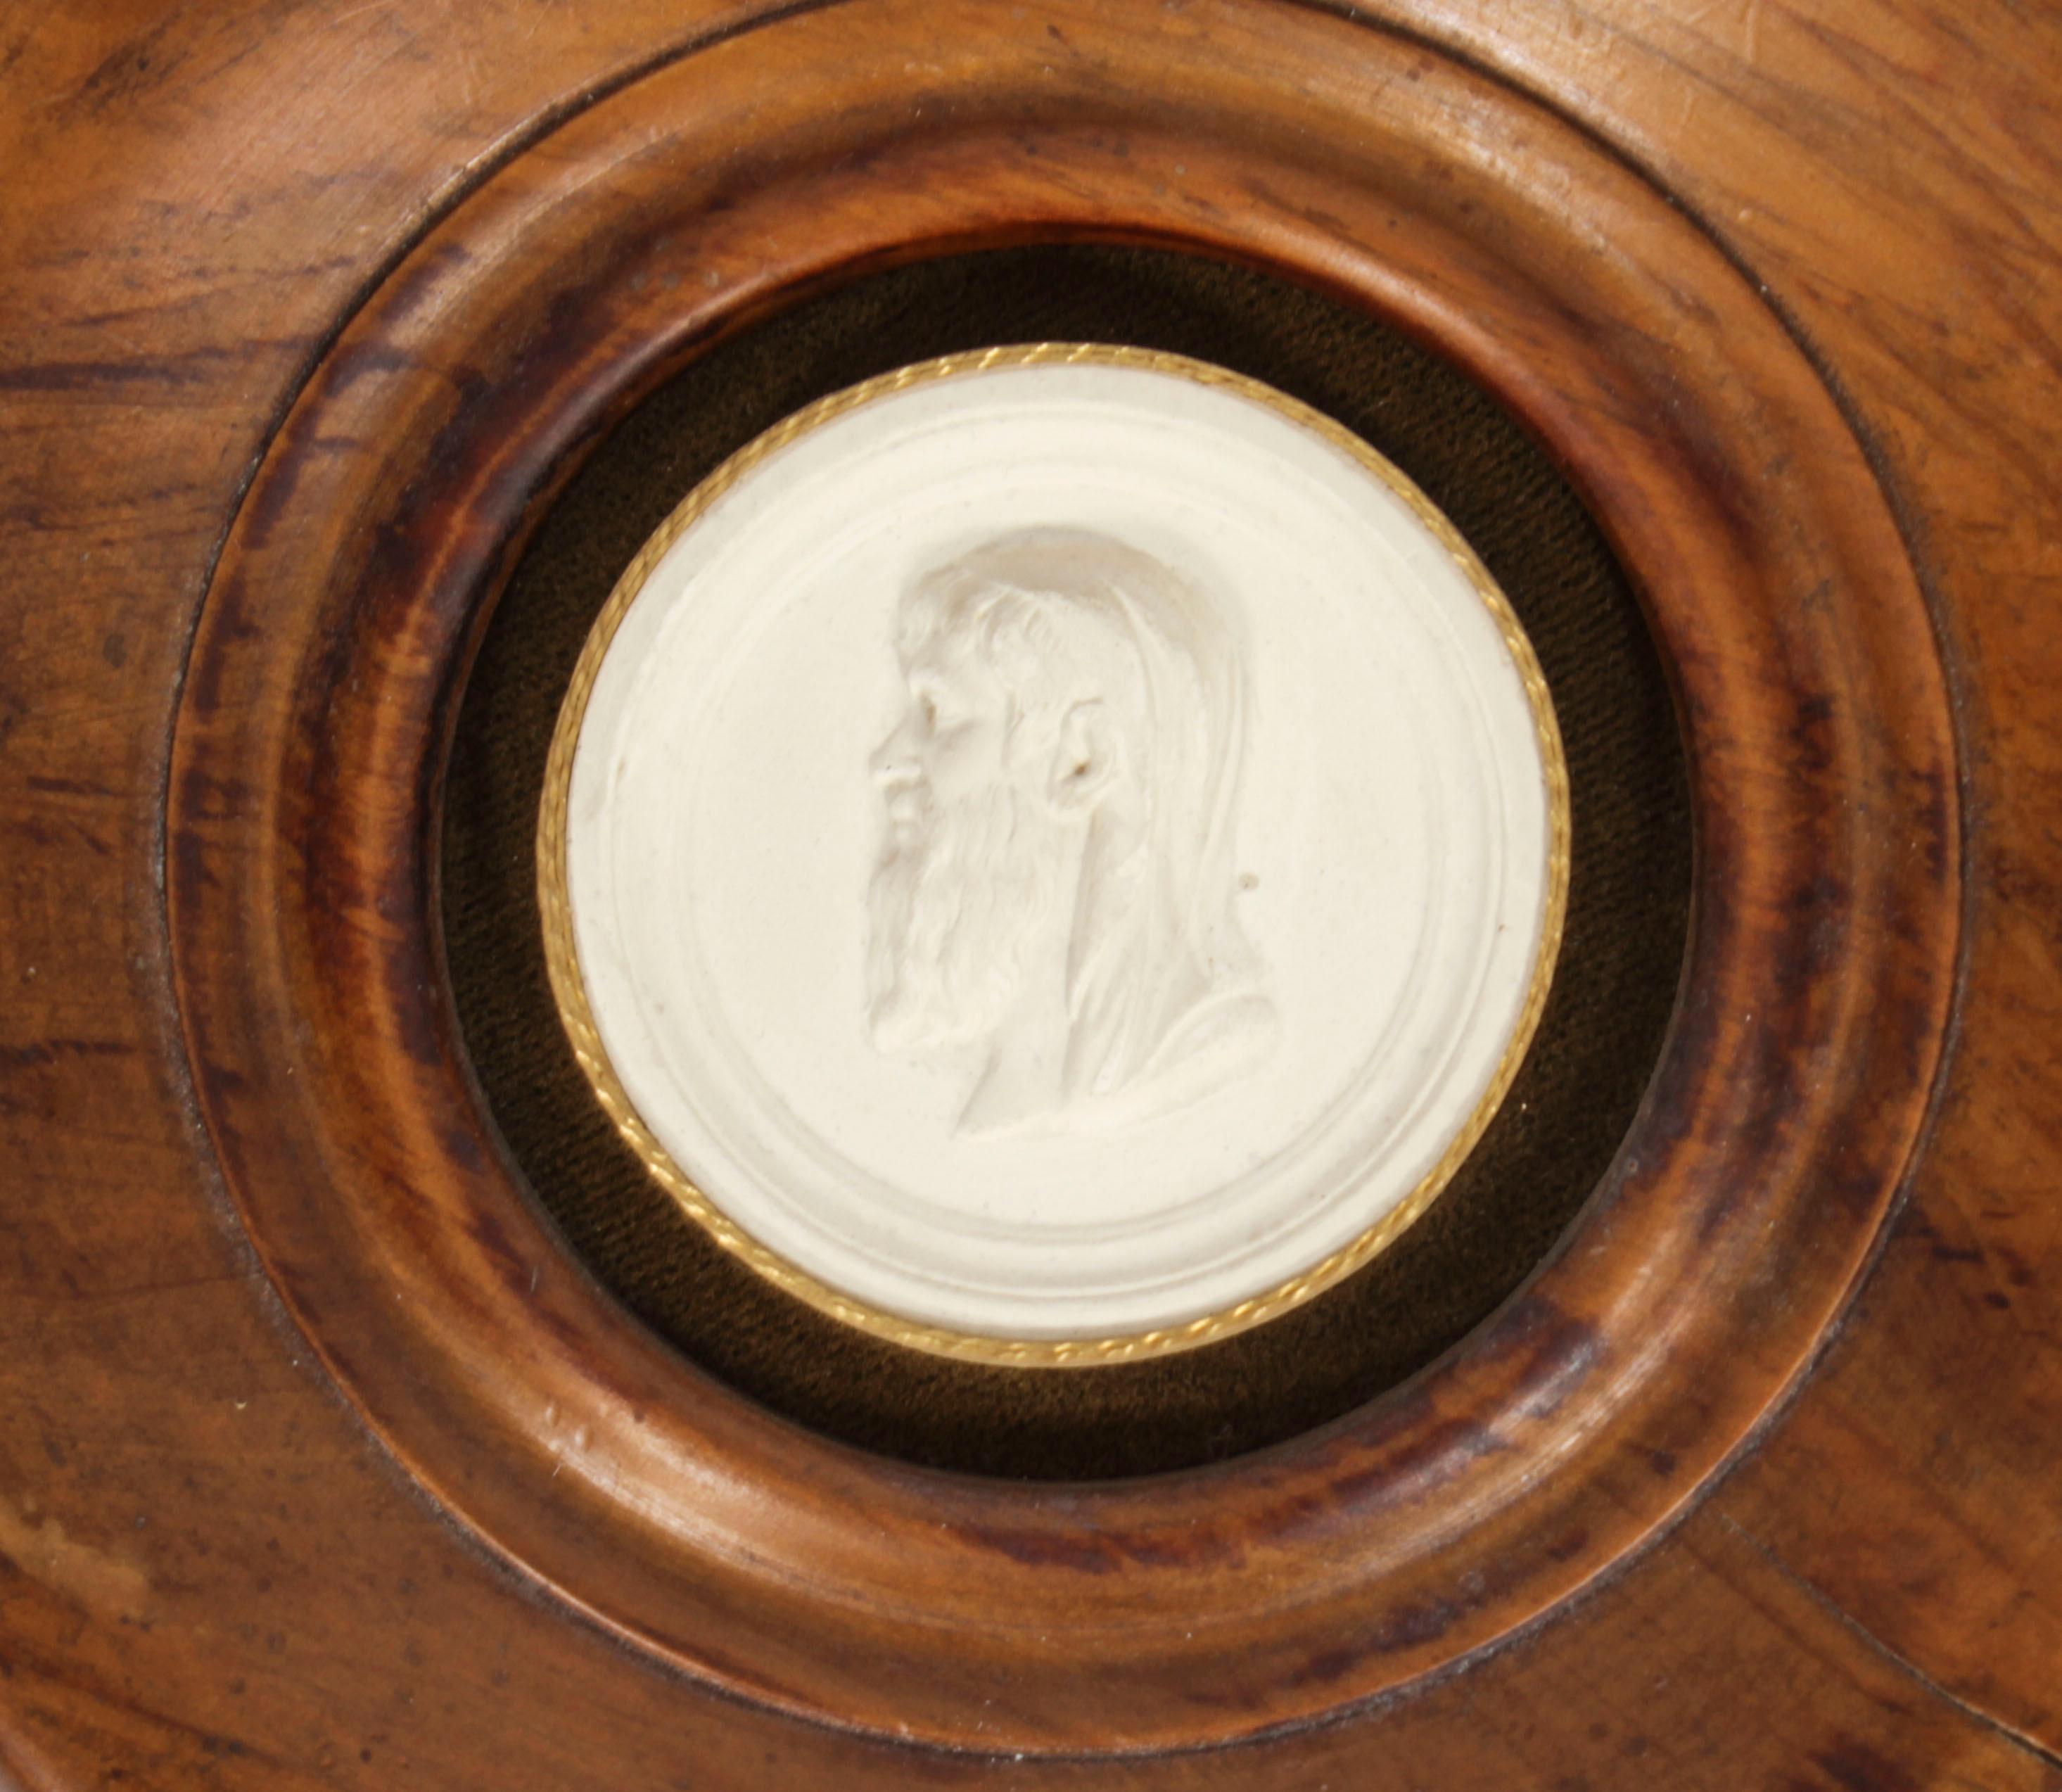 An  elegant framed plaster Grand Tour Giovanni Liberotti intaglio of Aristotle  dating from the early 19th Century.
 
The circular plaster intaglio comprises a portrait bust of the ancient philosopher Aristole
 
The intaglio is beautifully mounted